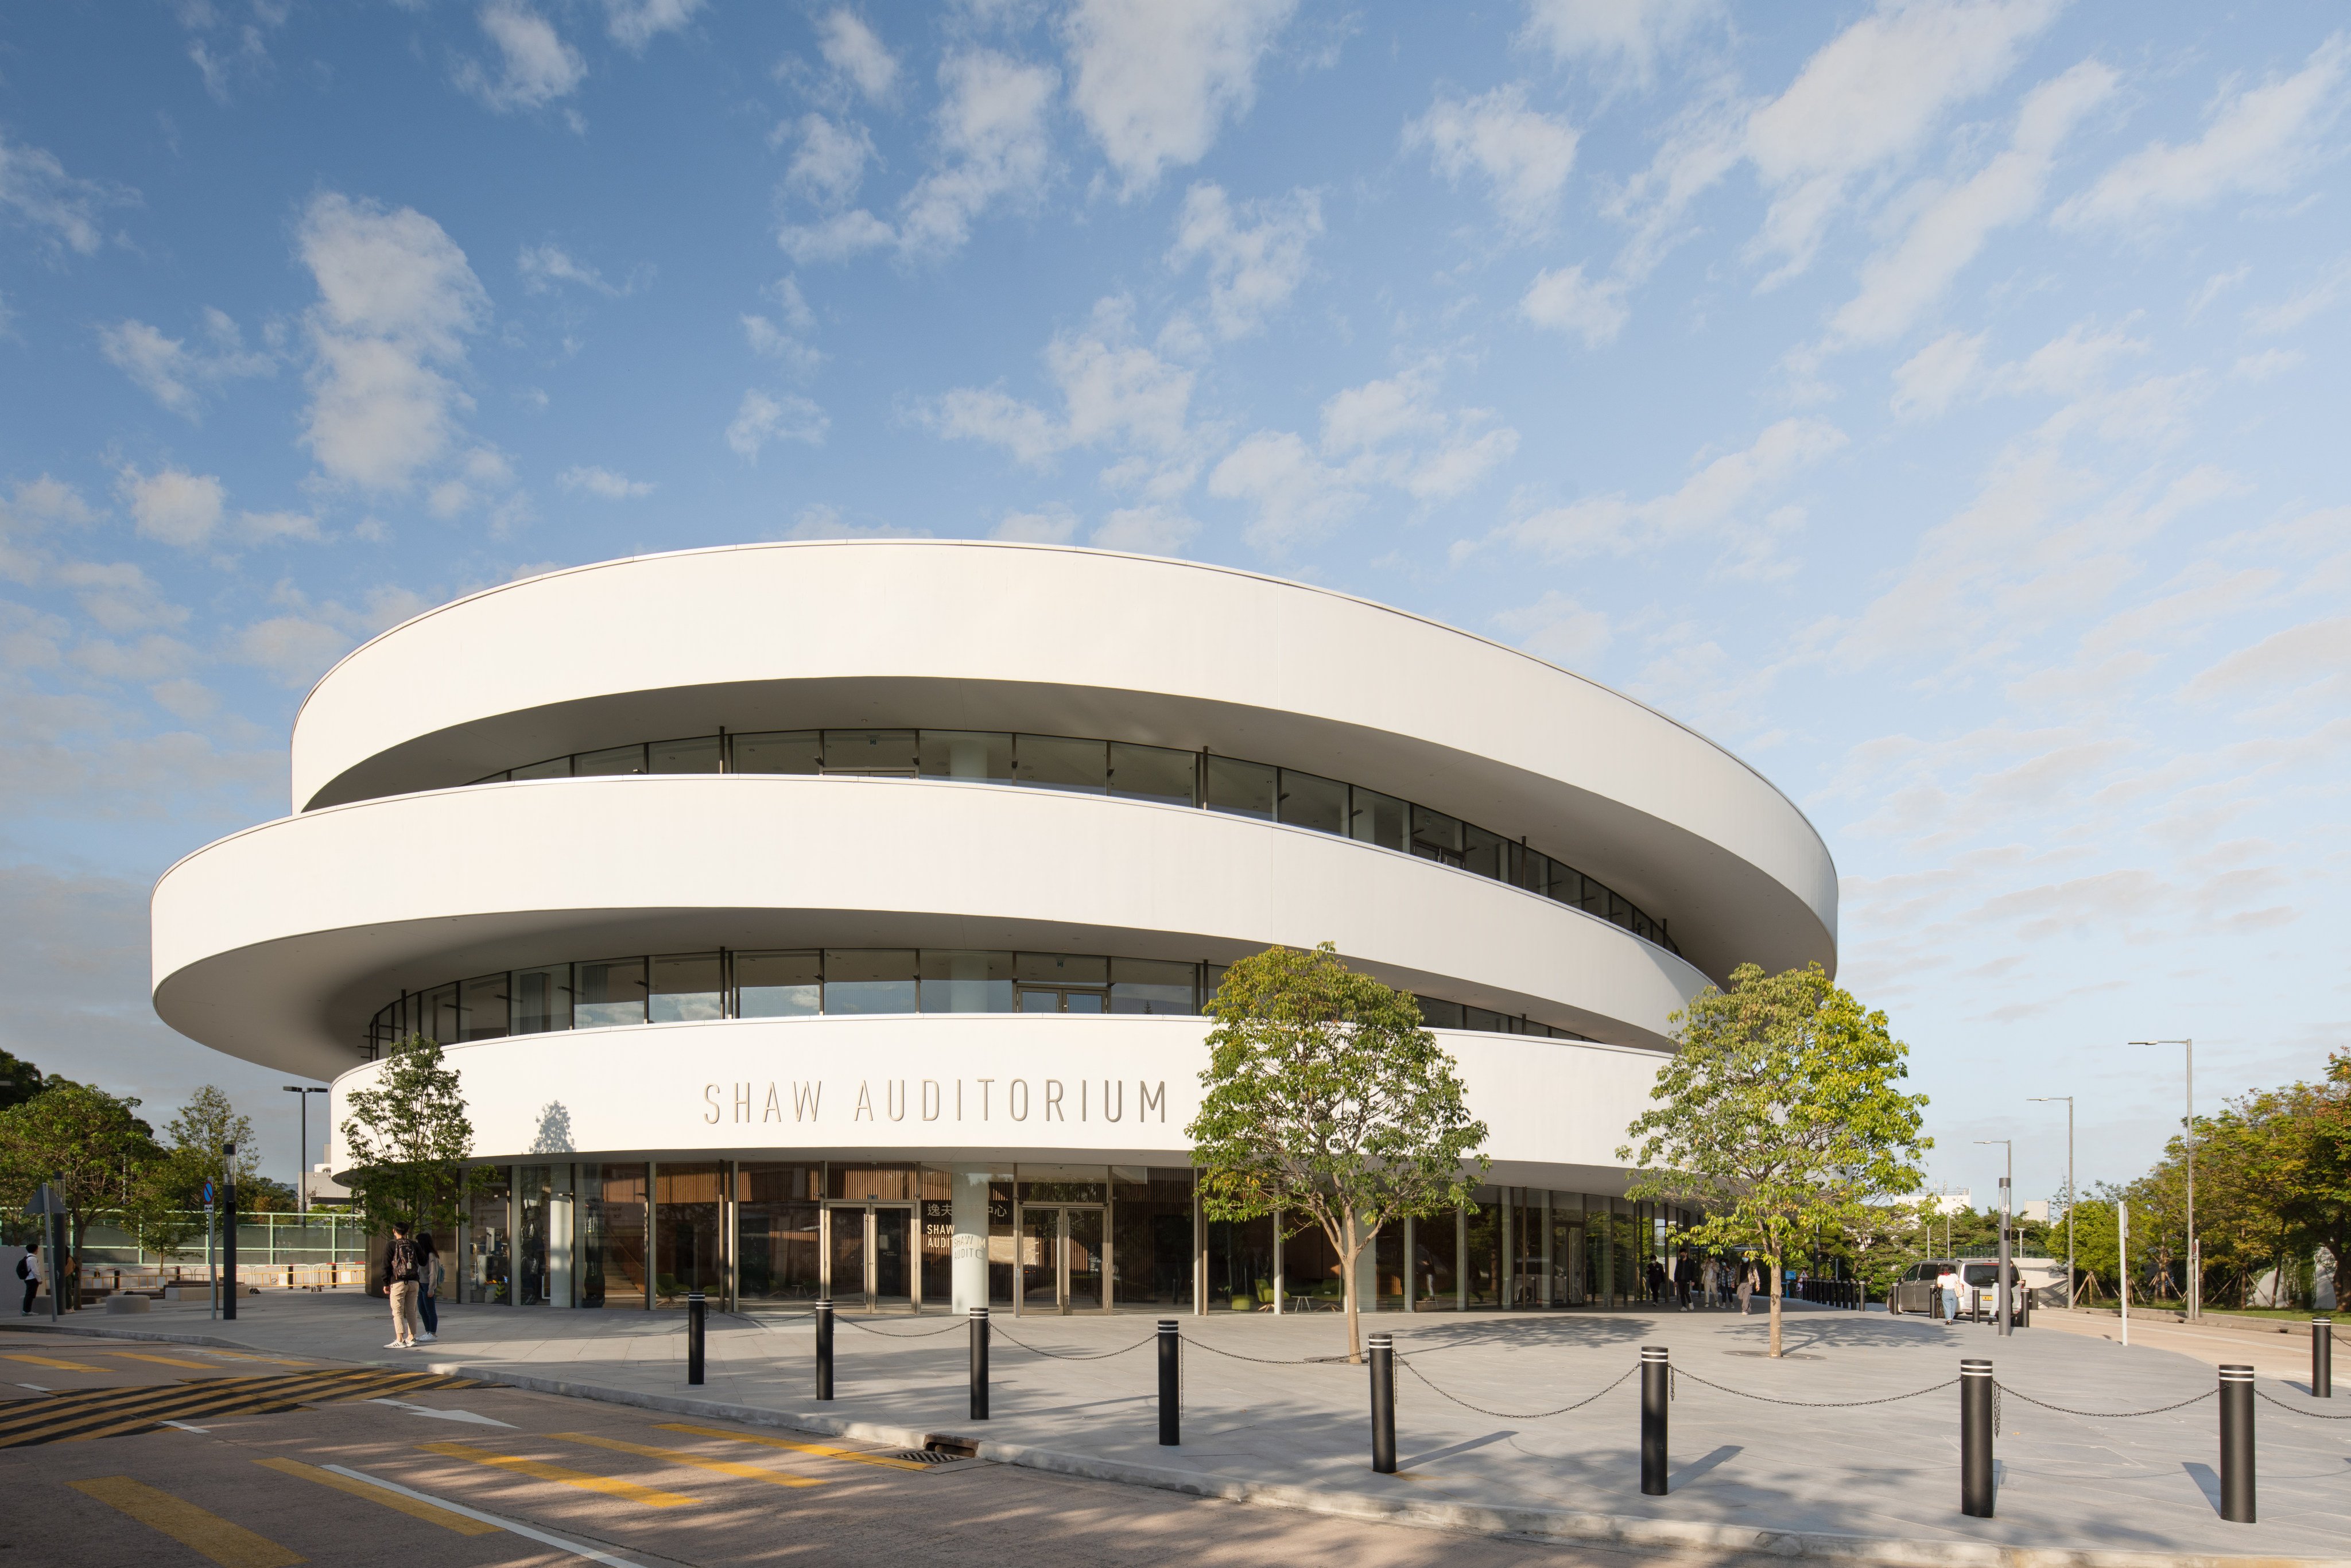 Shaw Auditorium, at the Hong Kong University of Science and Technology is among the points of interest in Design Citywalk HK, a guide that covers well known places in the city – as well as some unexpected ones. Photo: courtesy of HKUST